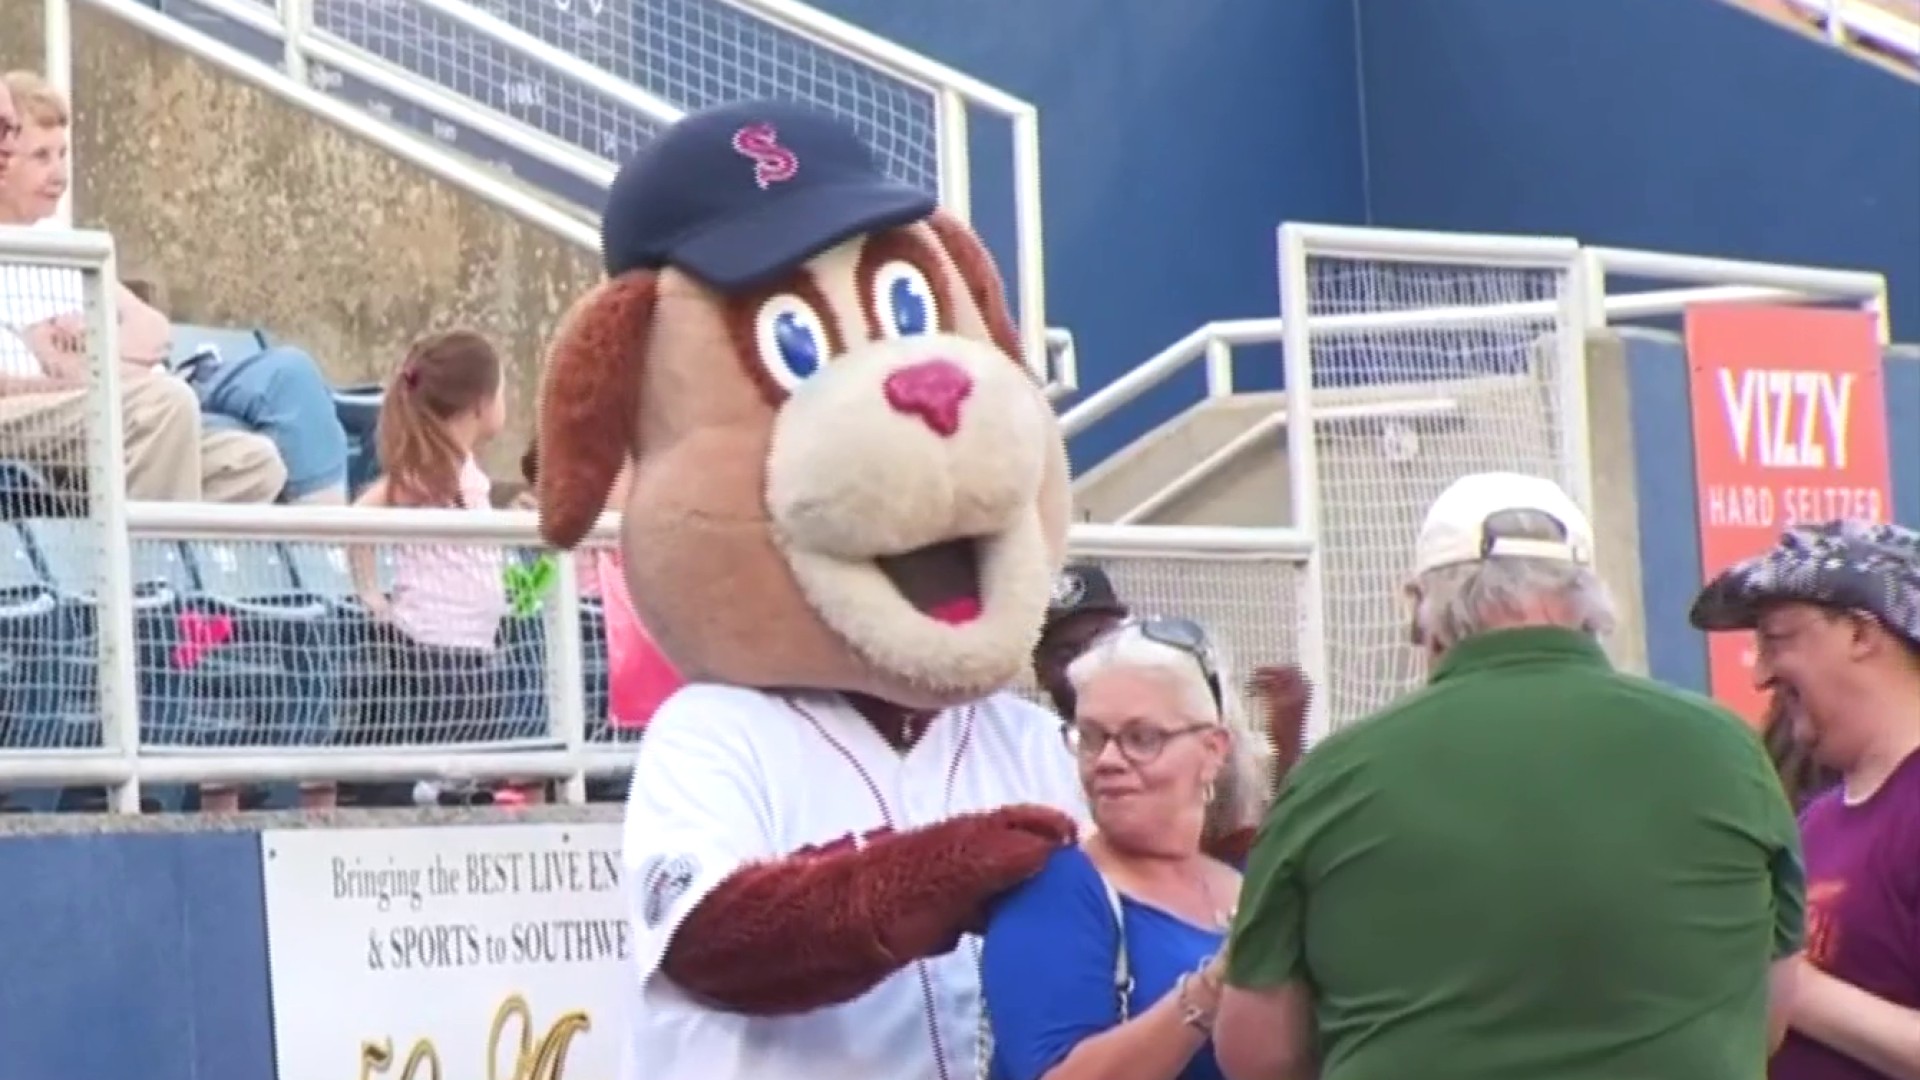 Salem Red Sox prepare for a jam-packed season of family fun ahead